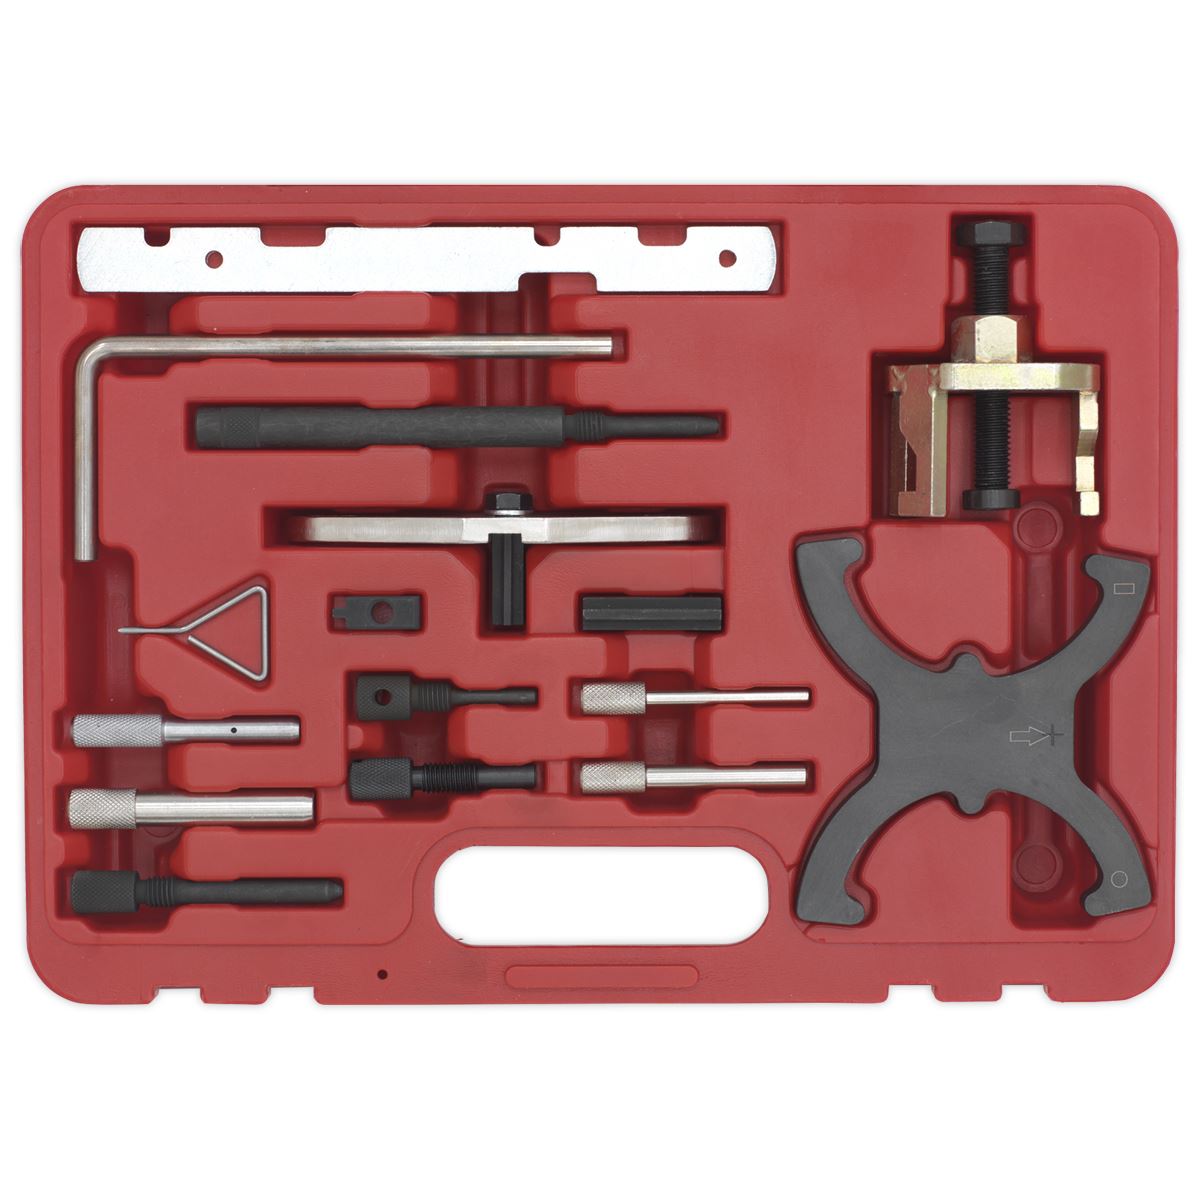 Sealey Diesel/Petrol Engine Timing Tool Combination Kit - for Ford, PSA - Belt/Chain Drive